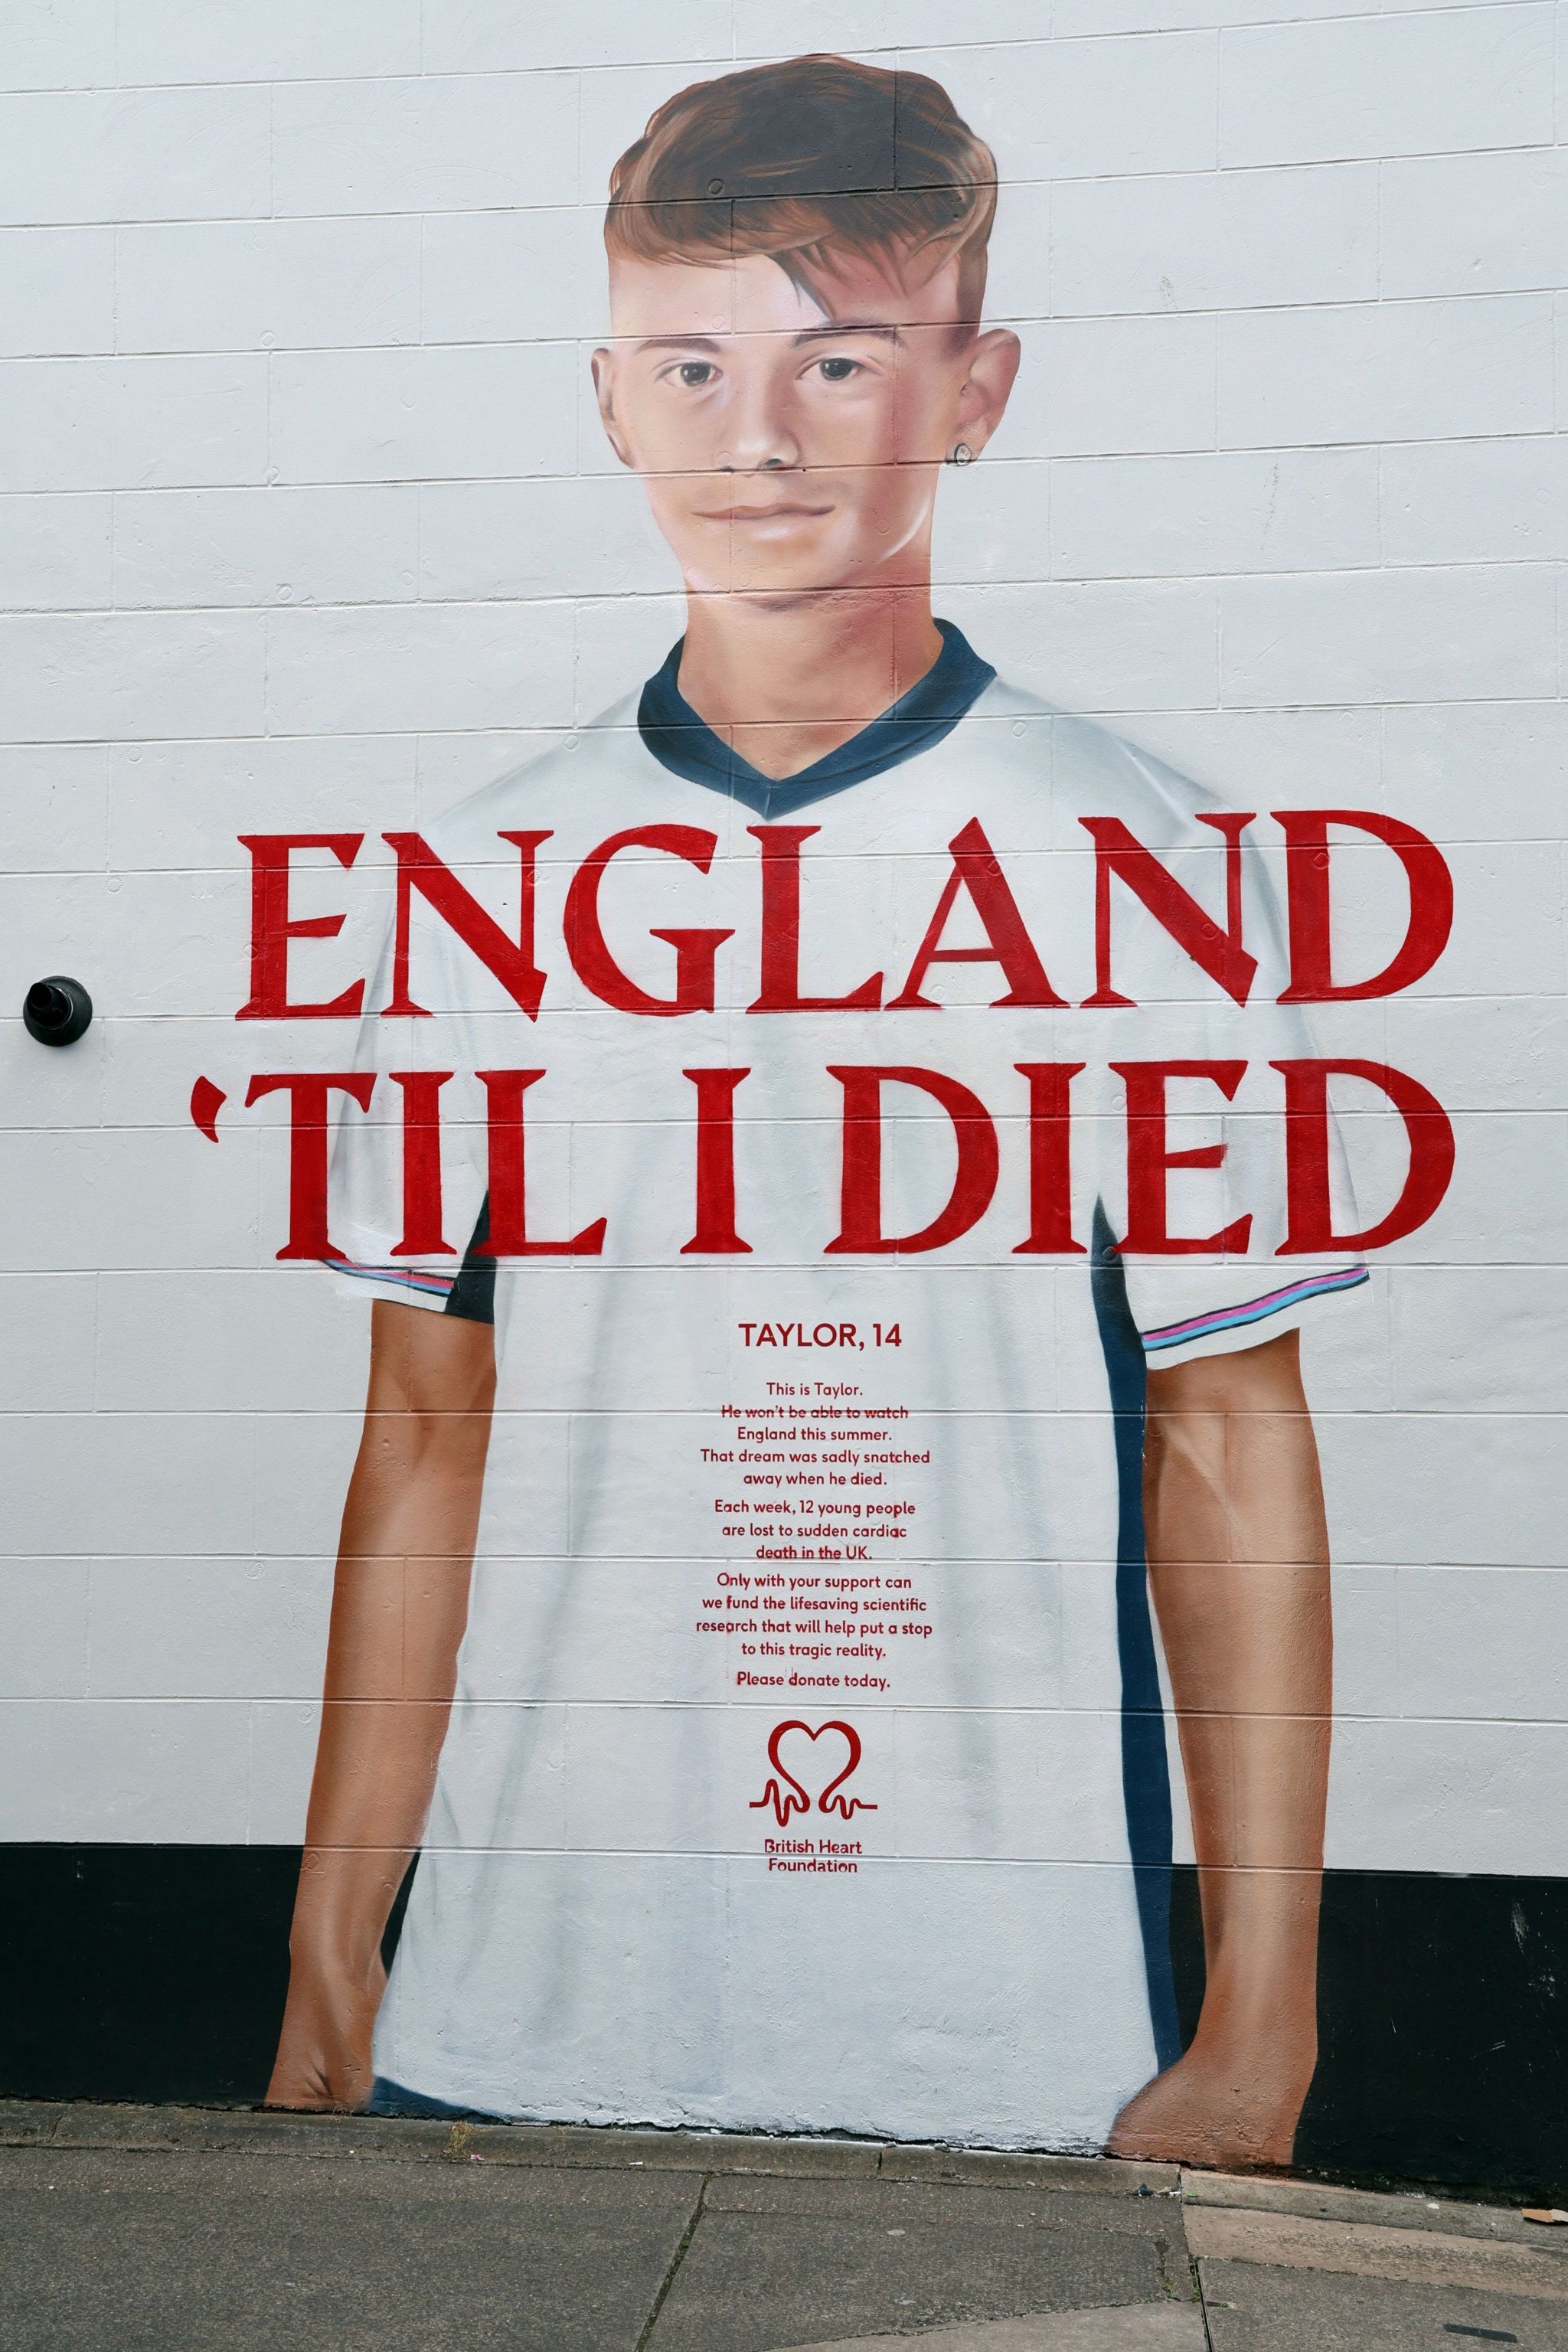 Mural to Taylor Atherton, 14, which says "England 'til I died"